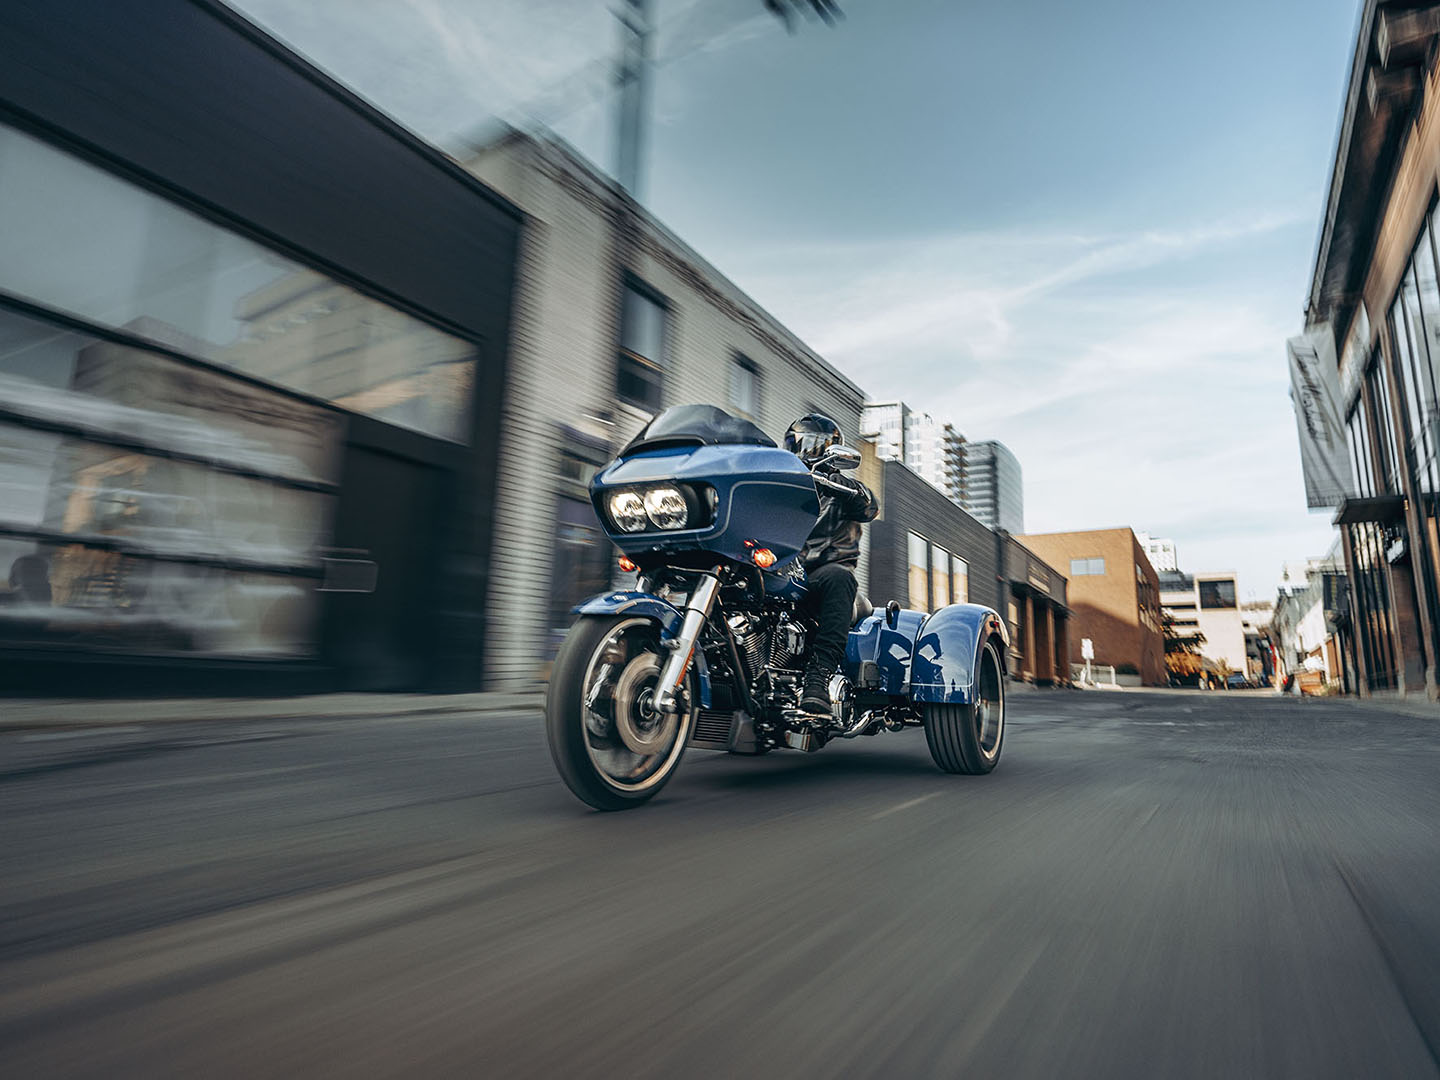 2023 Harley-Davidson Road Glide® 3 in New London, Connecticut - Photo 6